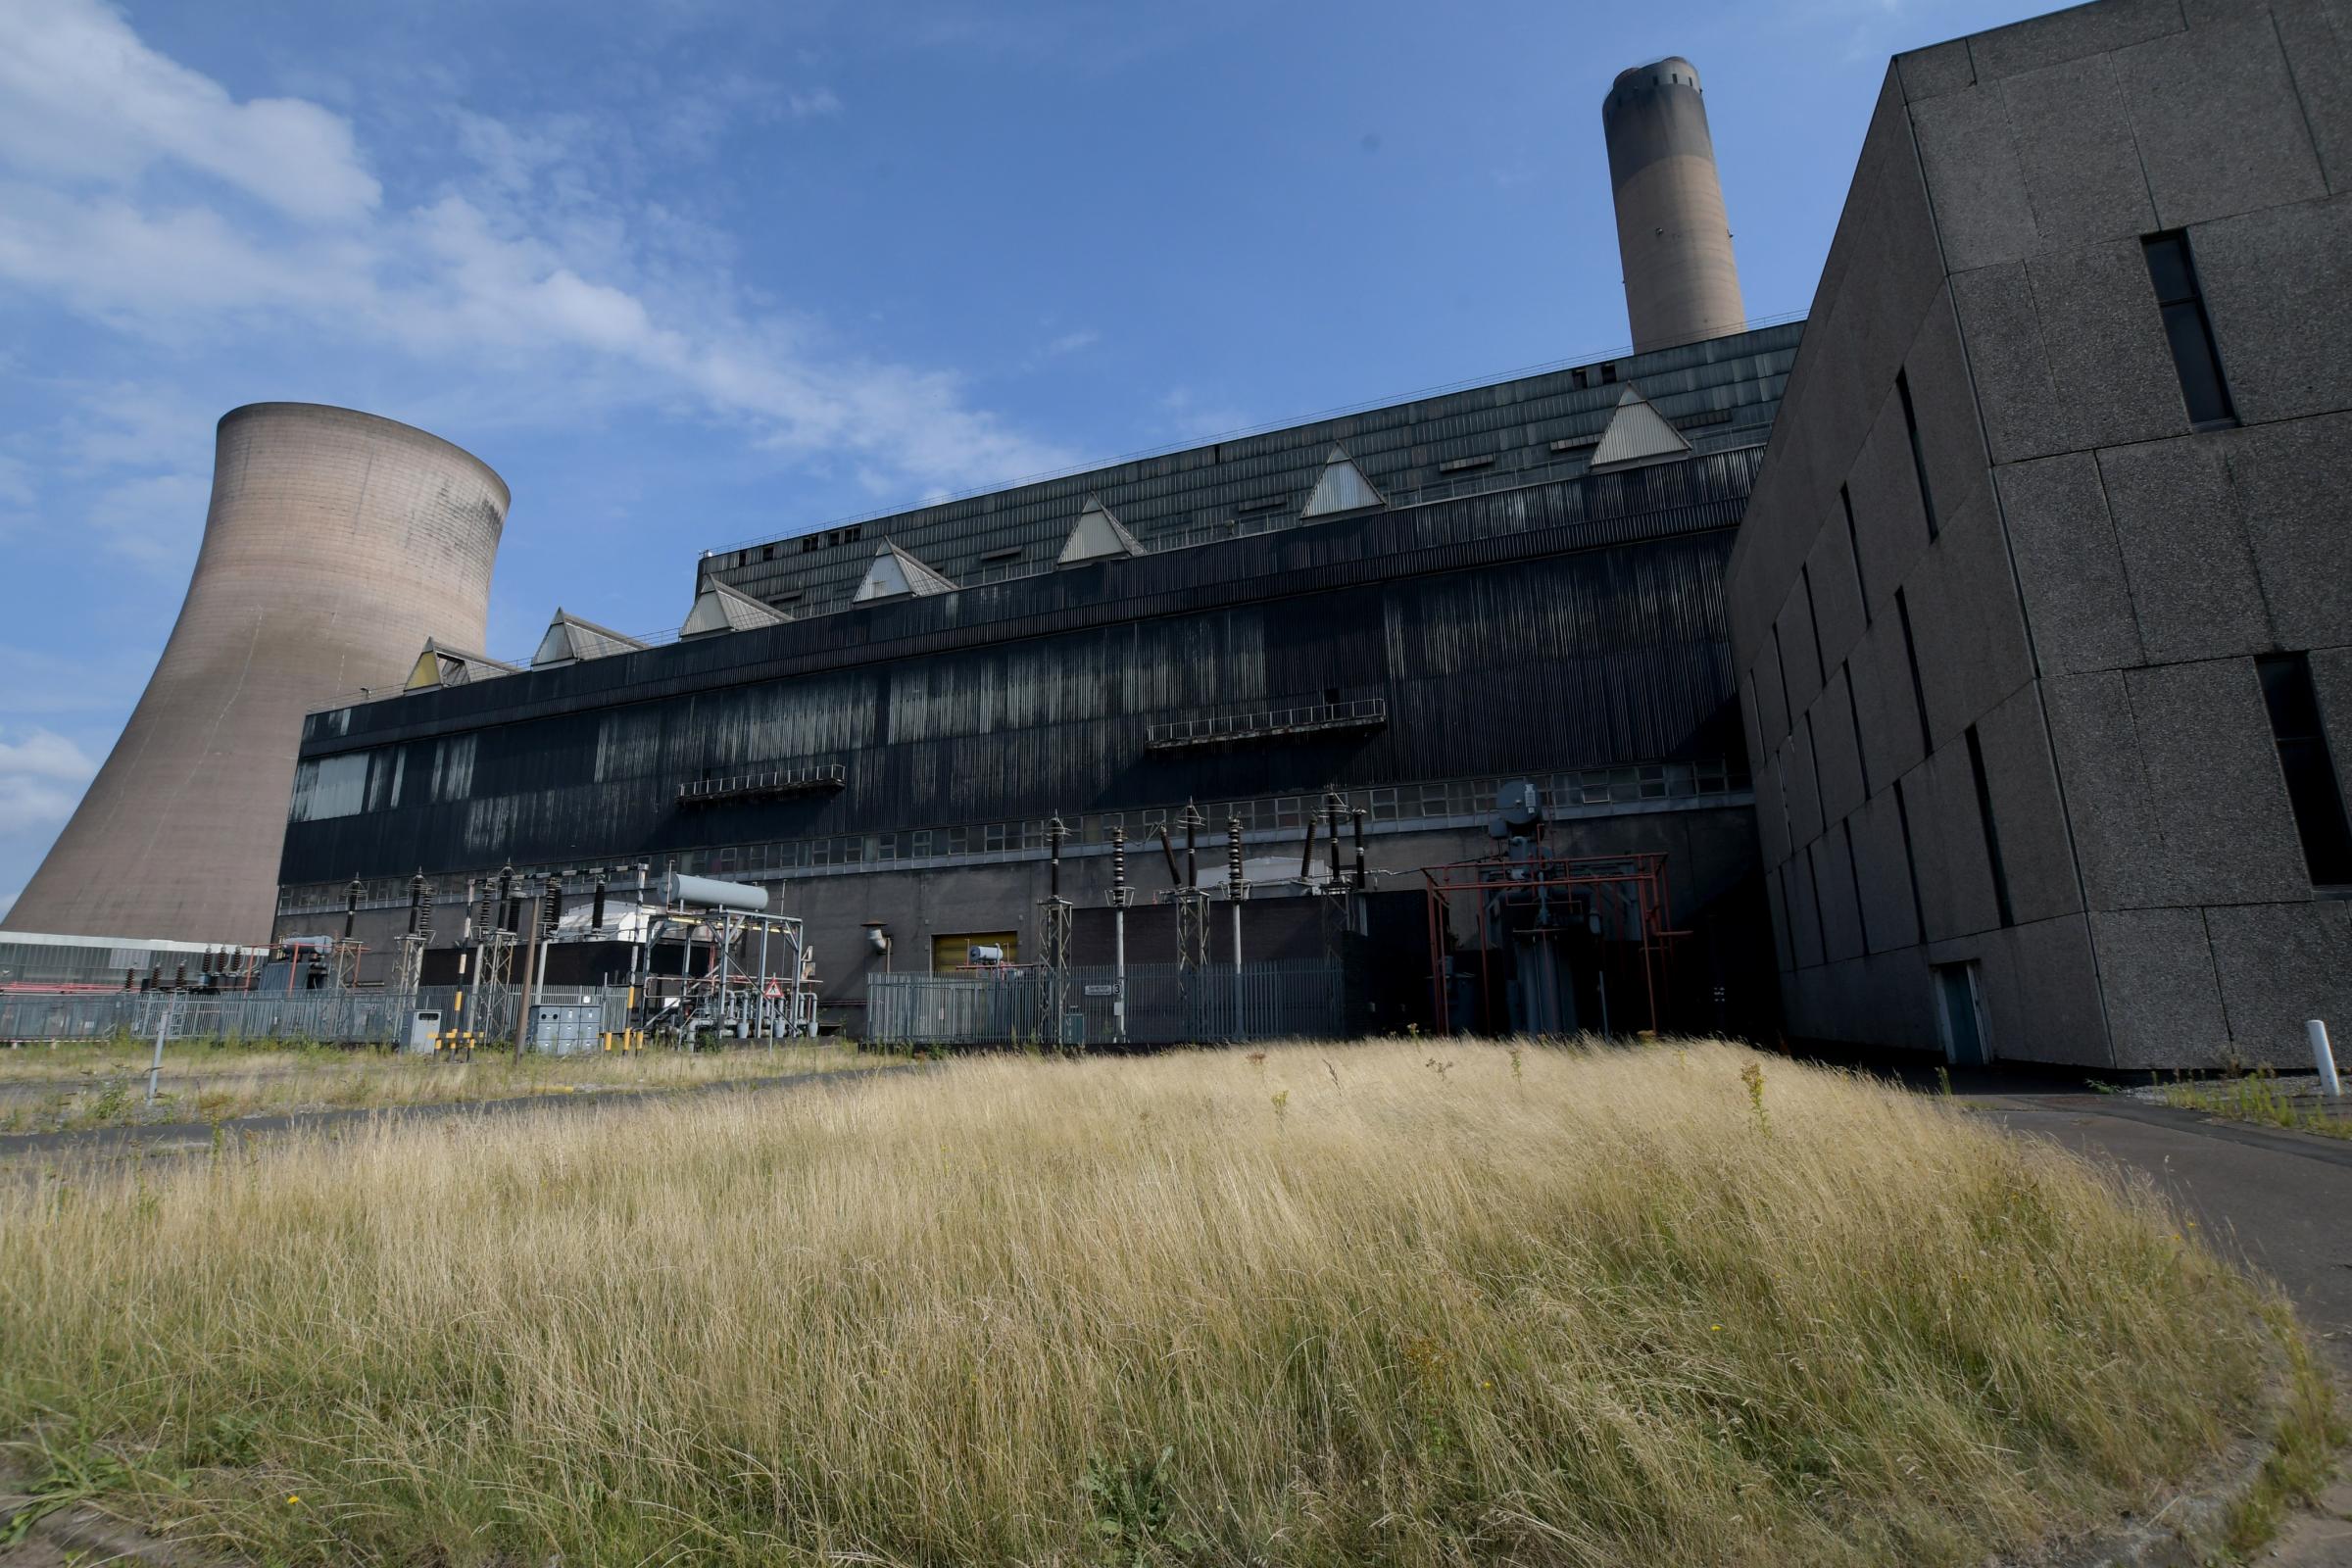 Plans have been submitted to begin the demolition of Fiddlers Ferry Power Station (Image: Dave Gillespie)